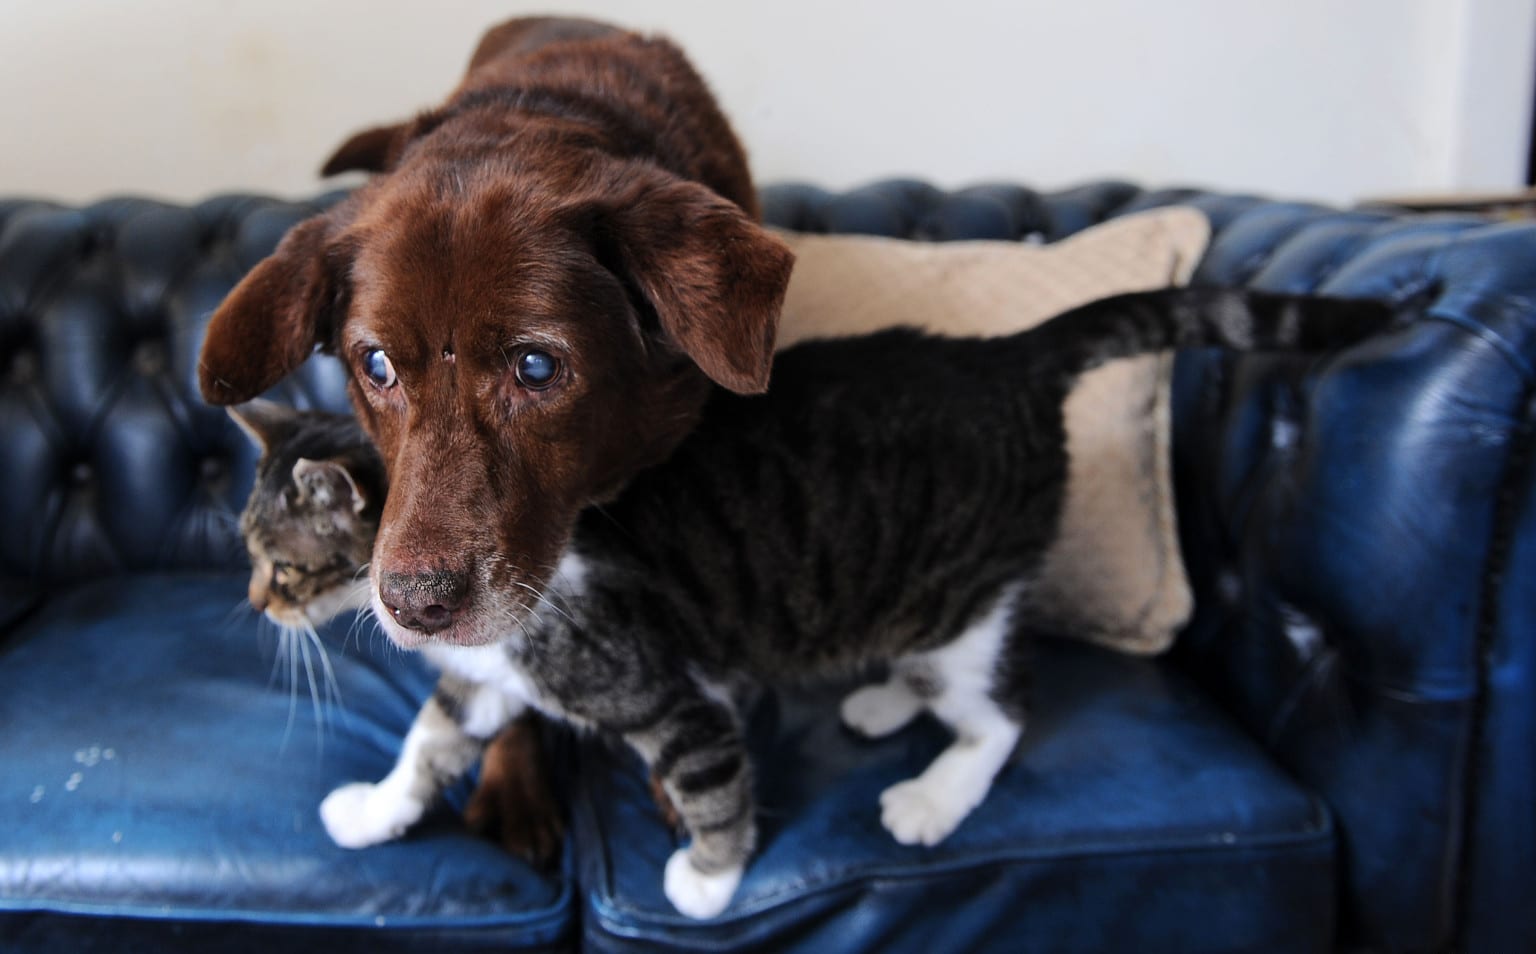 Seeing Eye Cat: Compassionate Cat Guides Blind Dog Around